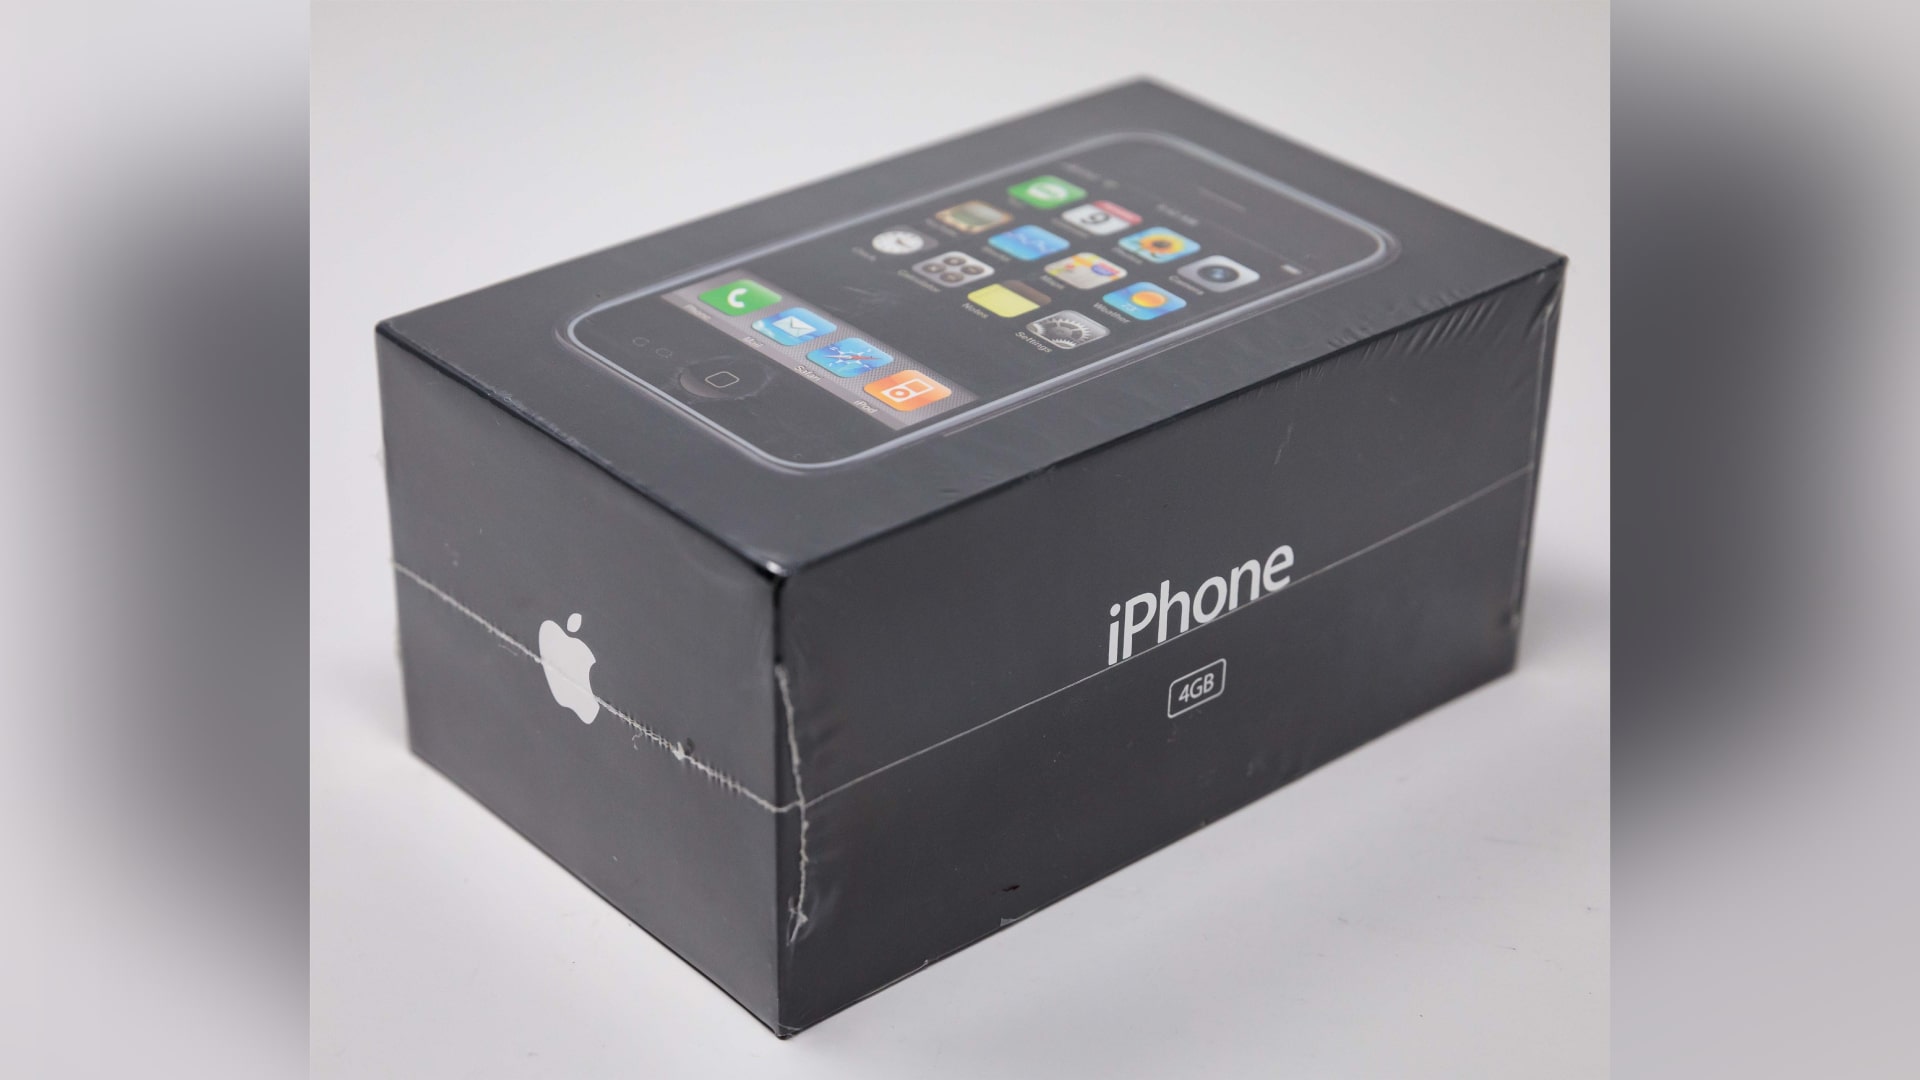 An original 4GB iPhone sealed in its packaging.